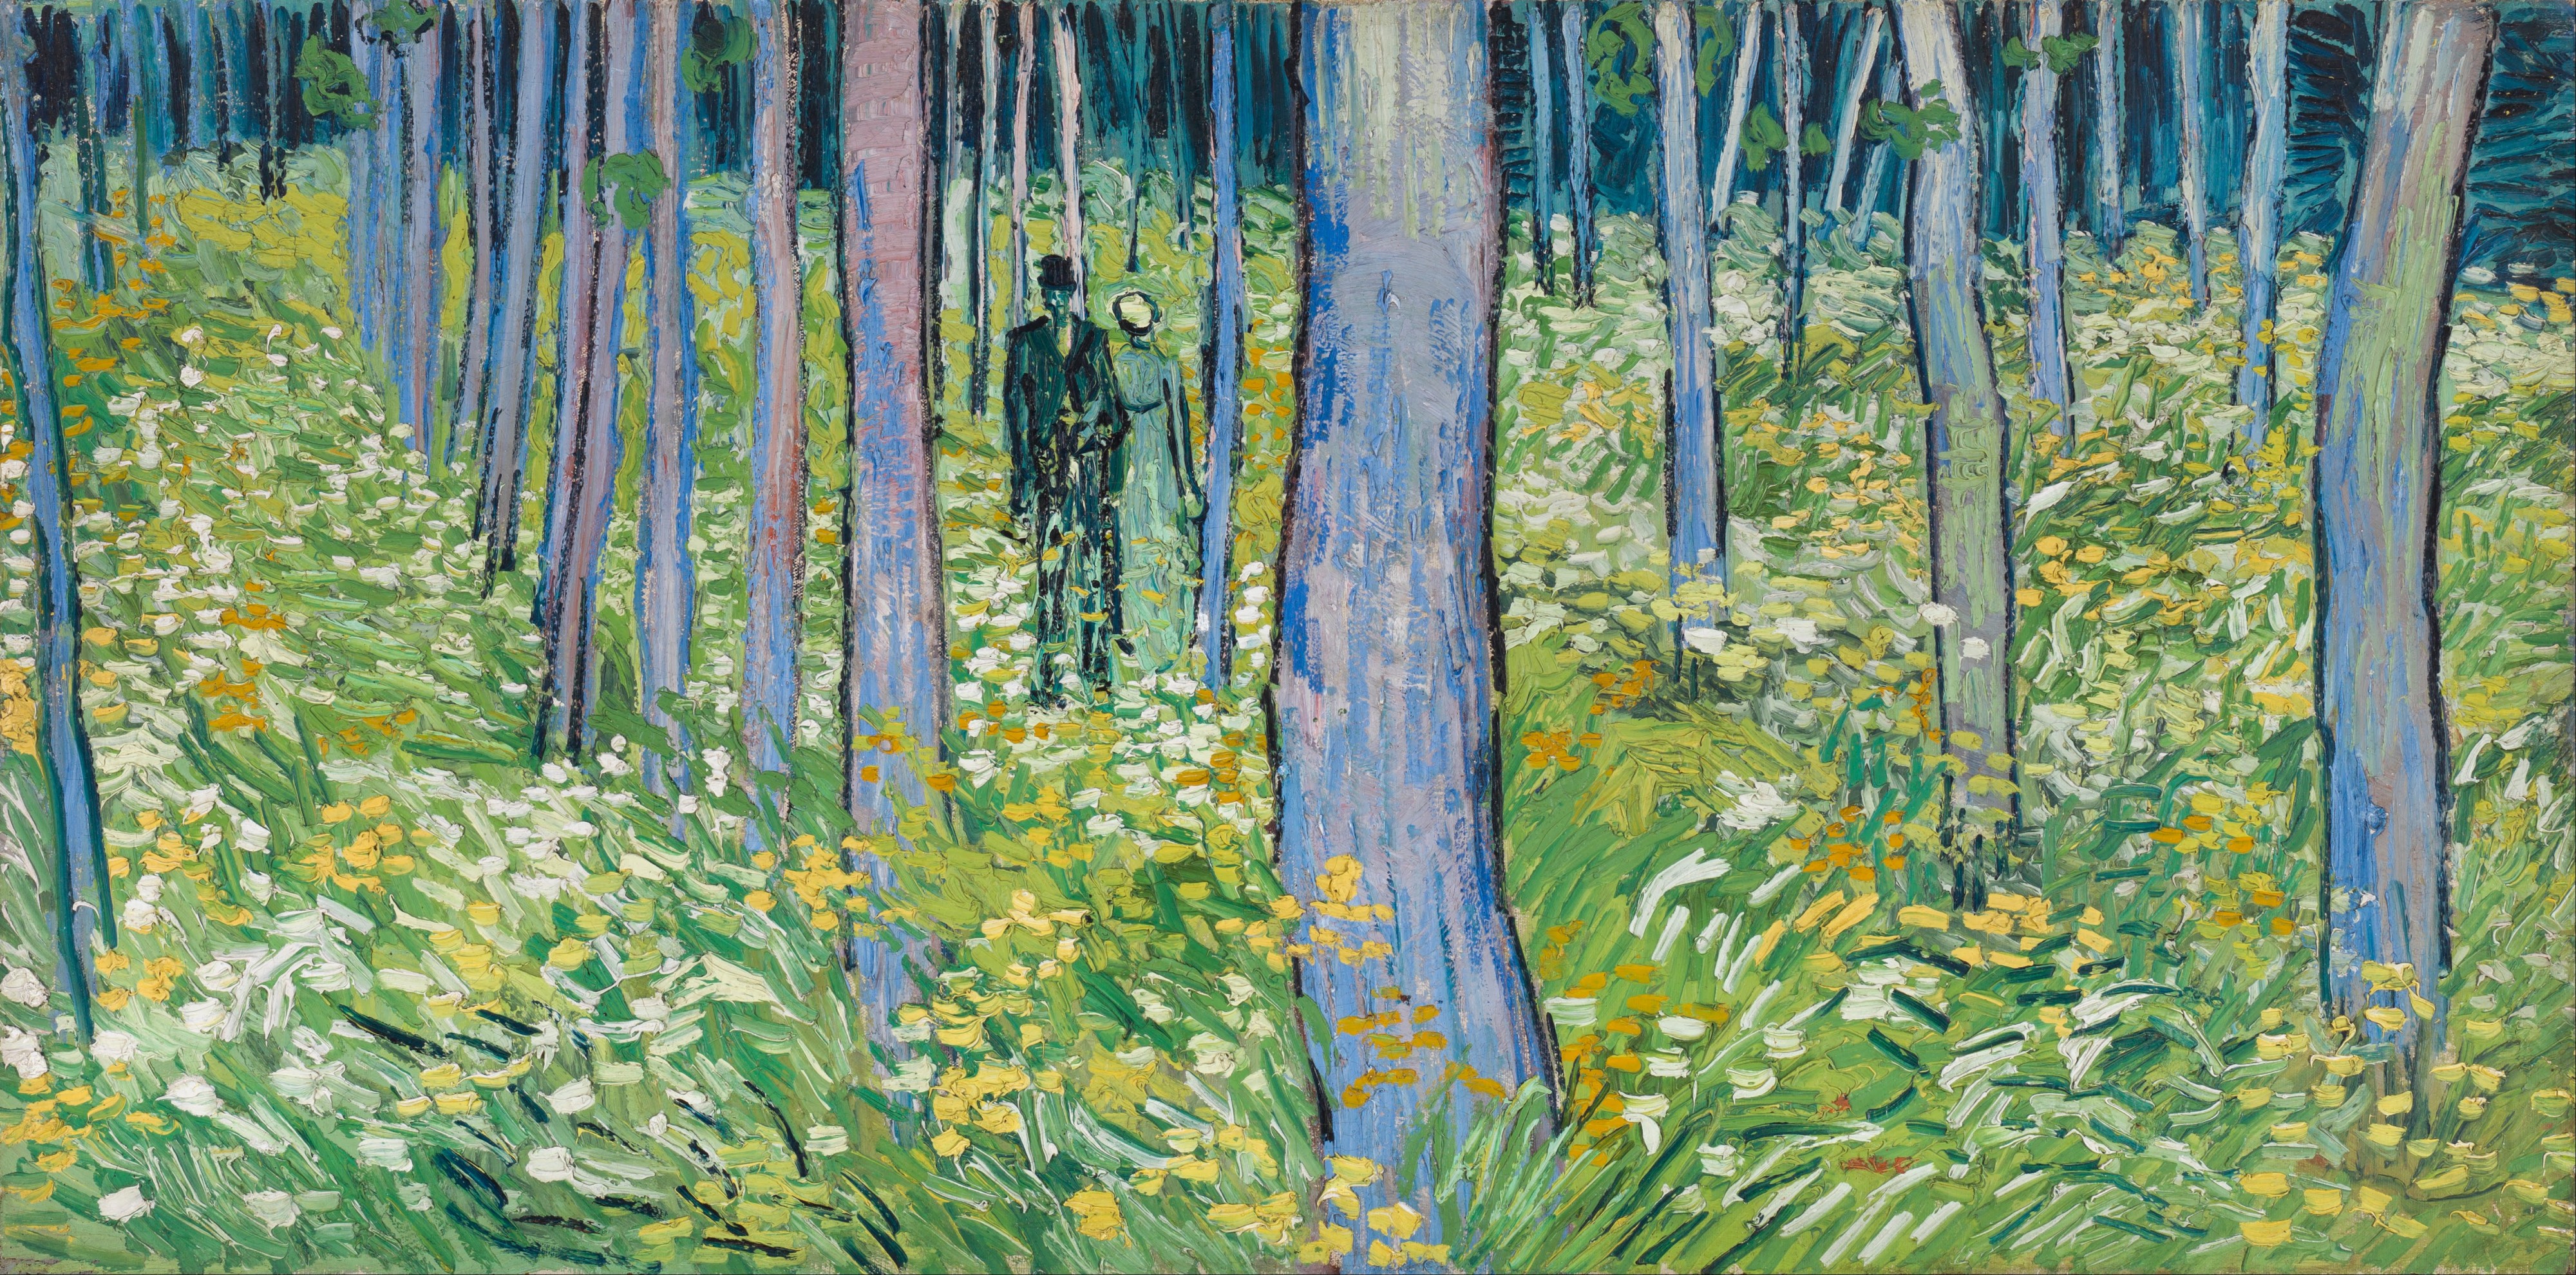 Vincent van Gogh - Undergrowth with Two Figures - Google Art Project